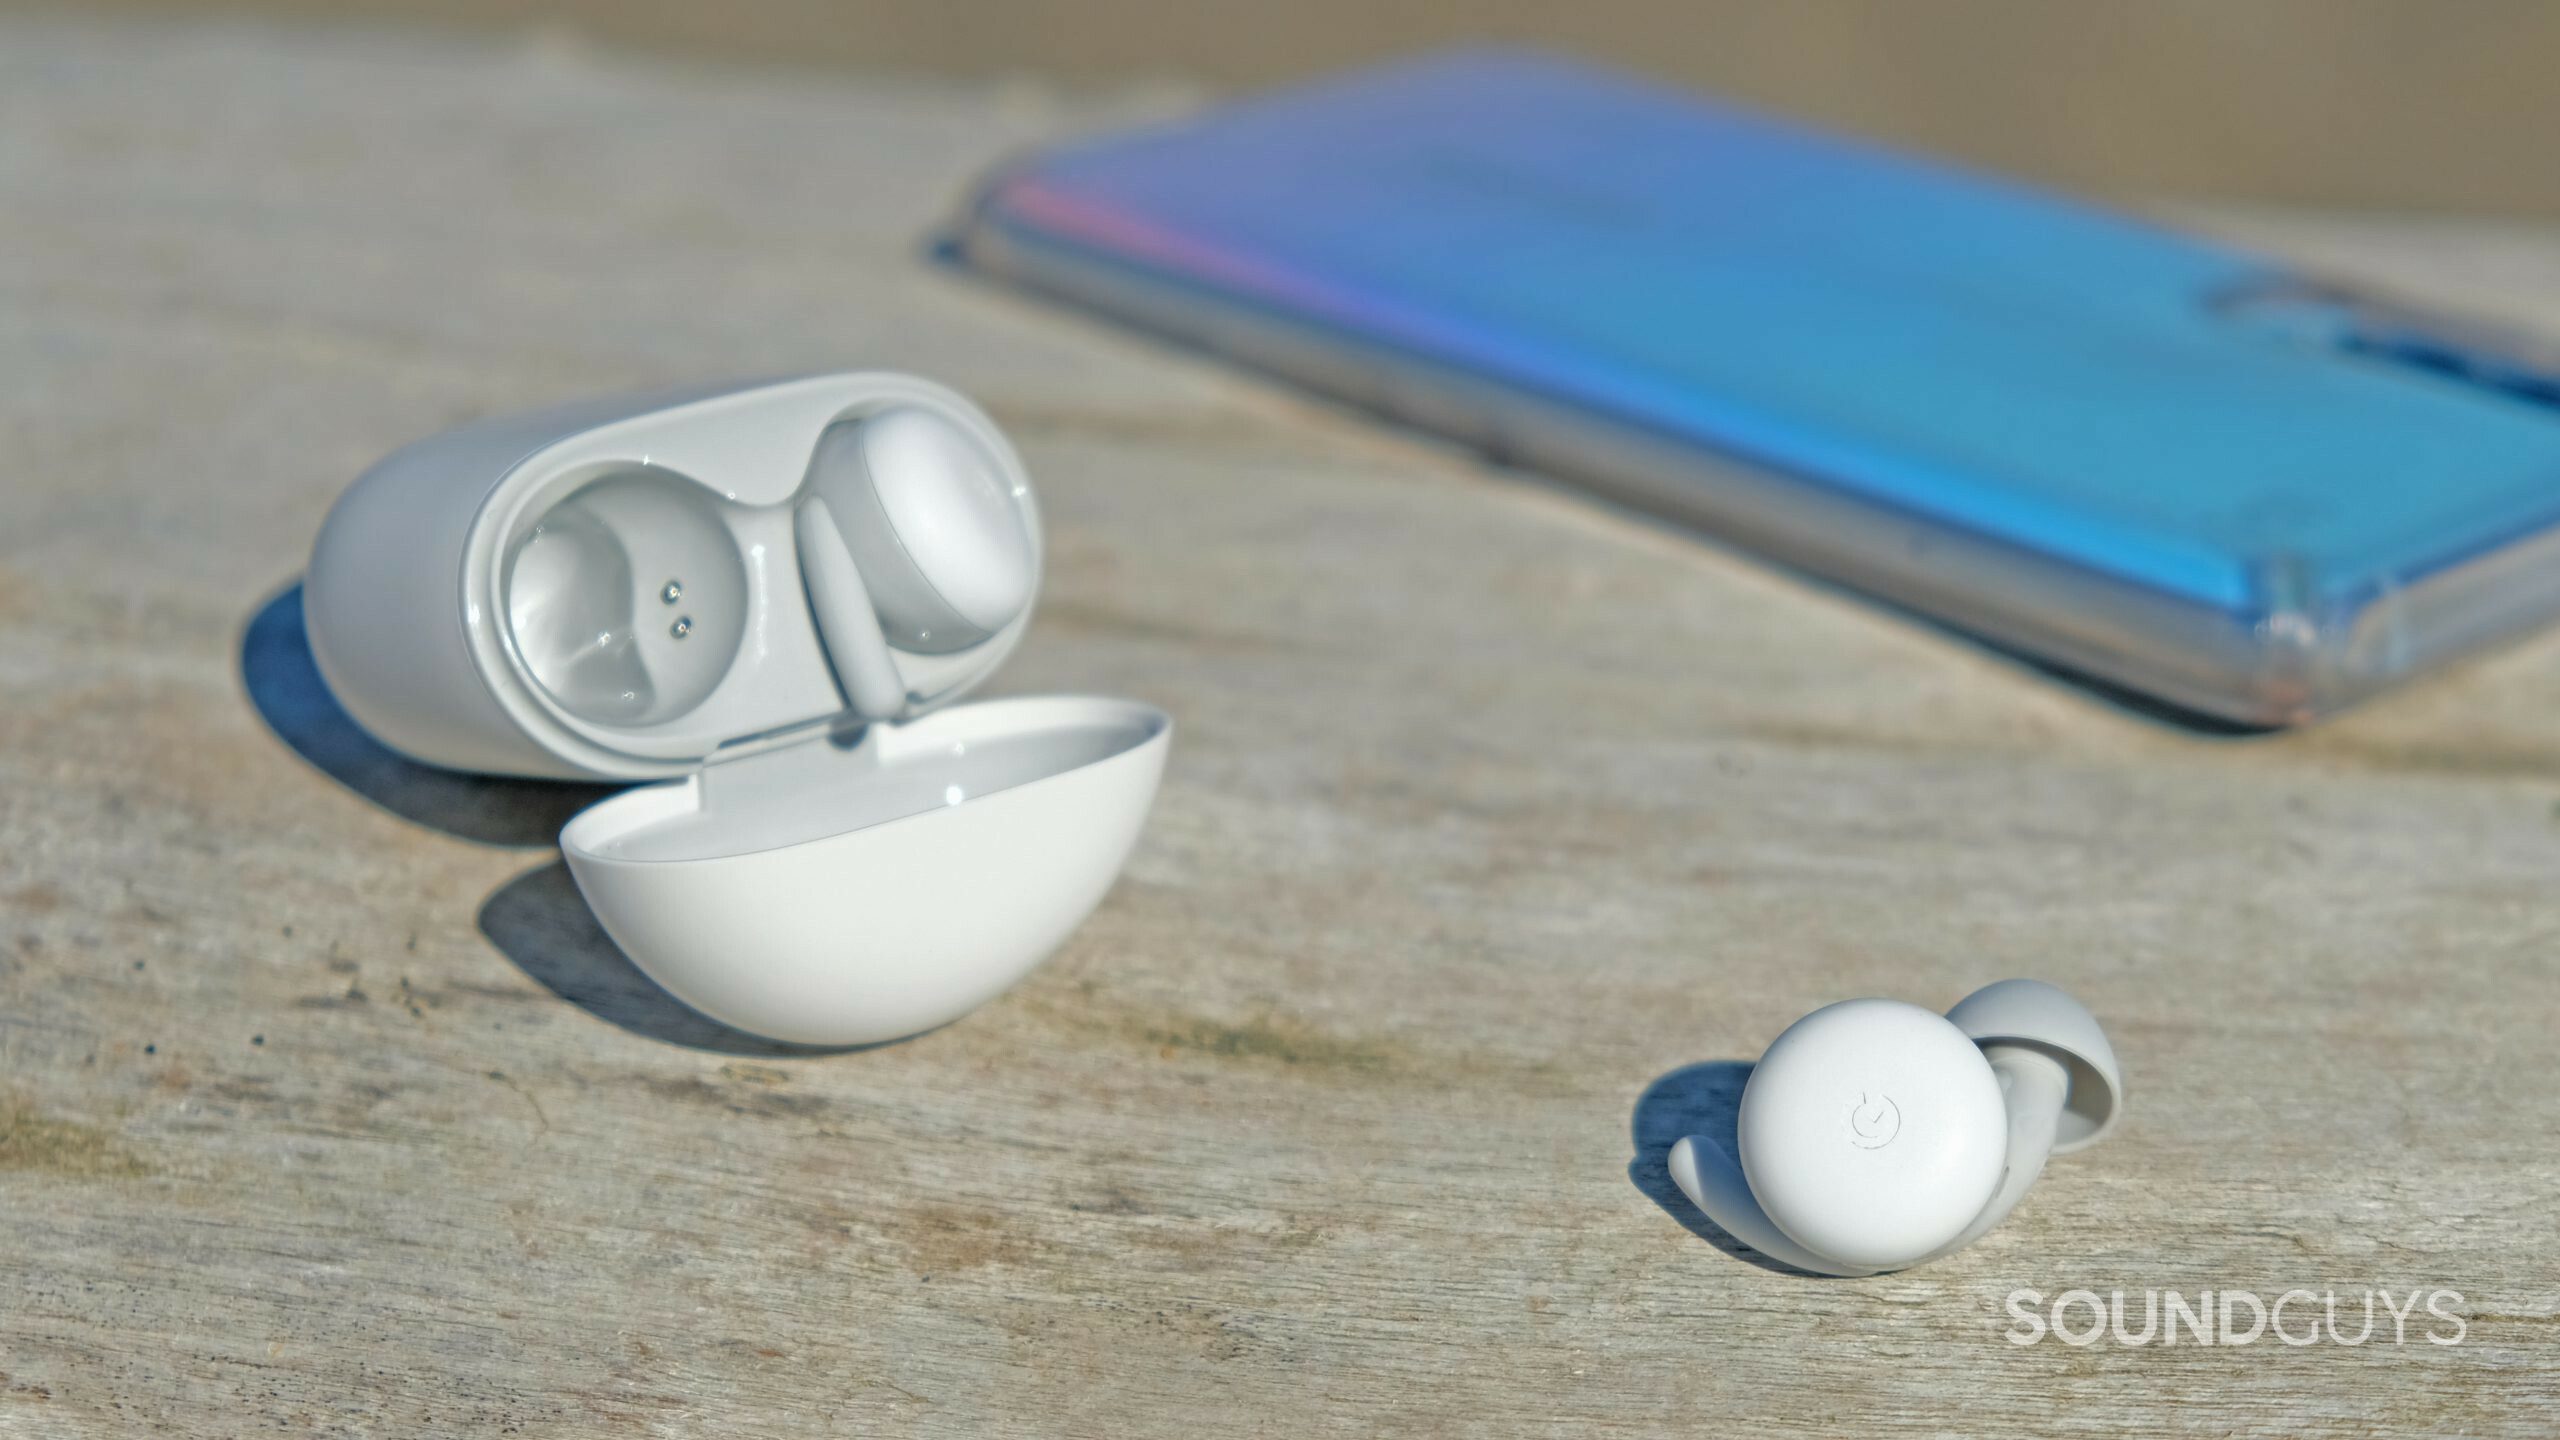 The Google Pixel Buds A-Series on driftwood with a smartphone.